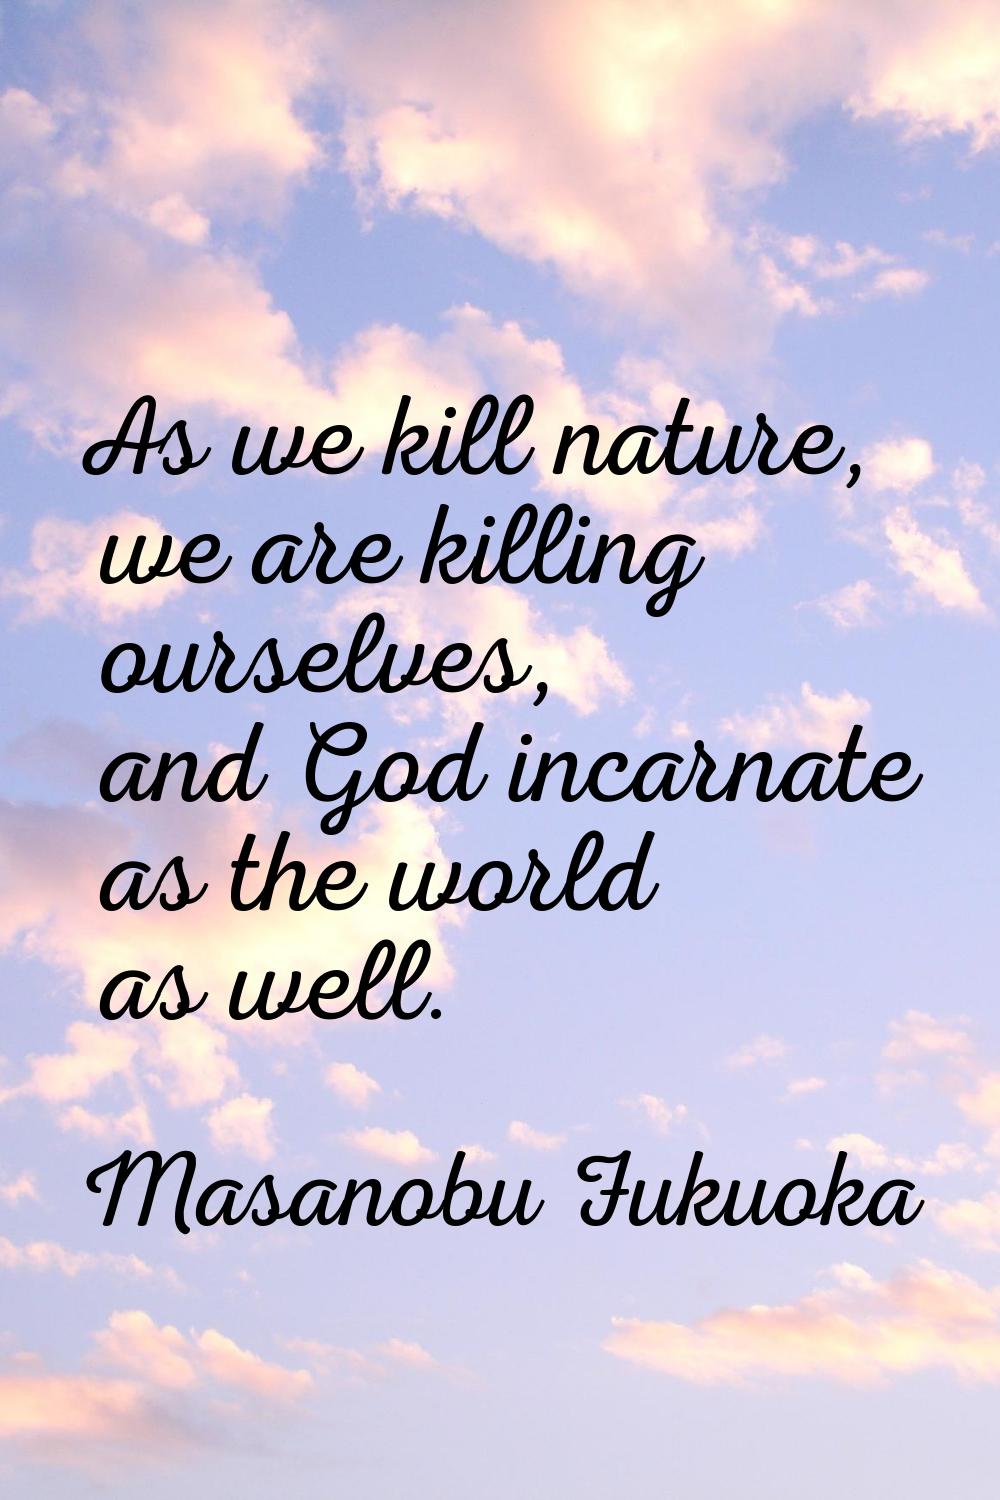 As we kill nature, we are killing ourselves, and God incarnate as the world as well.